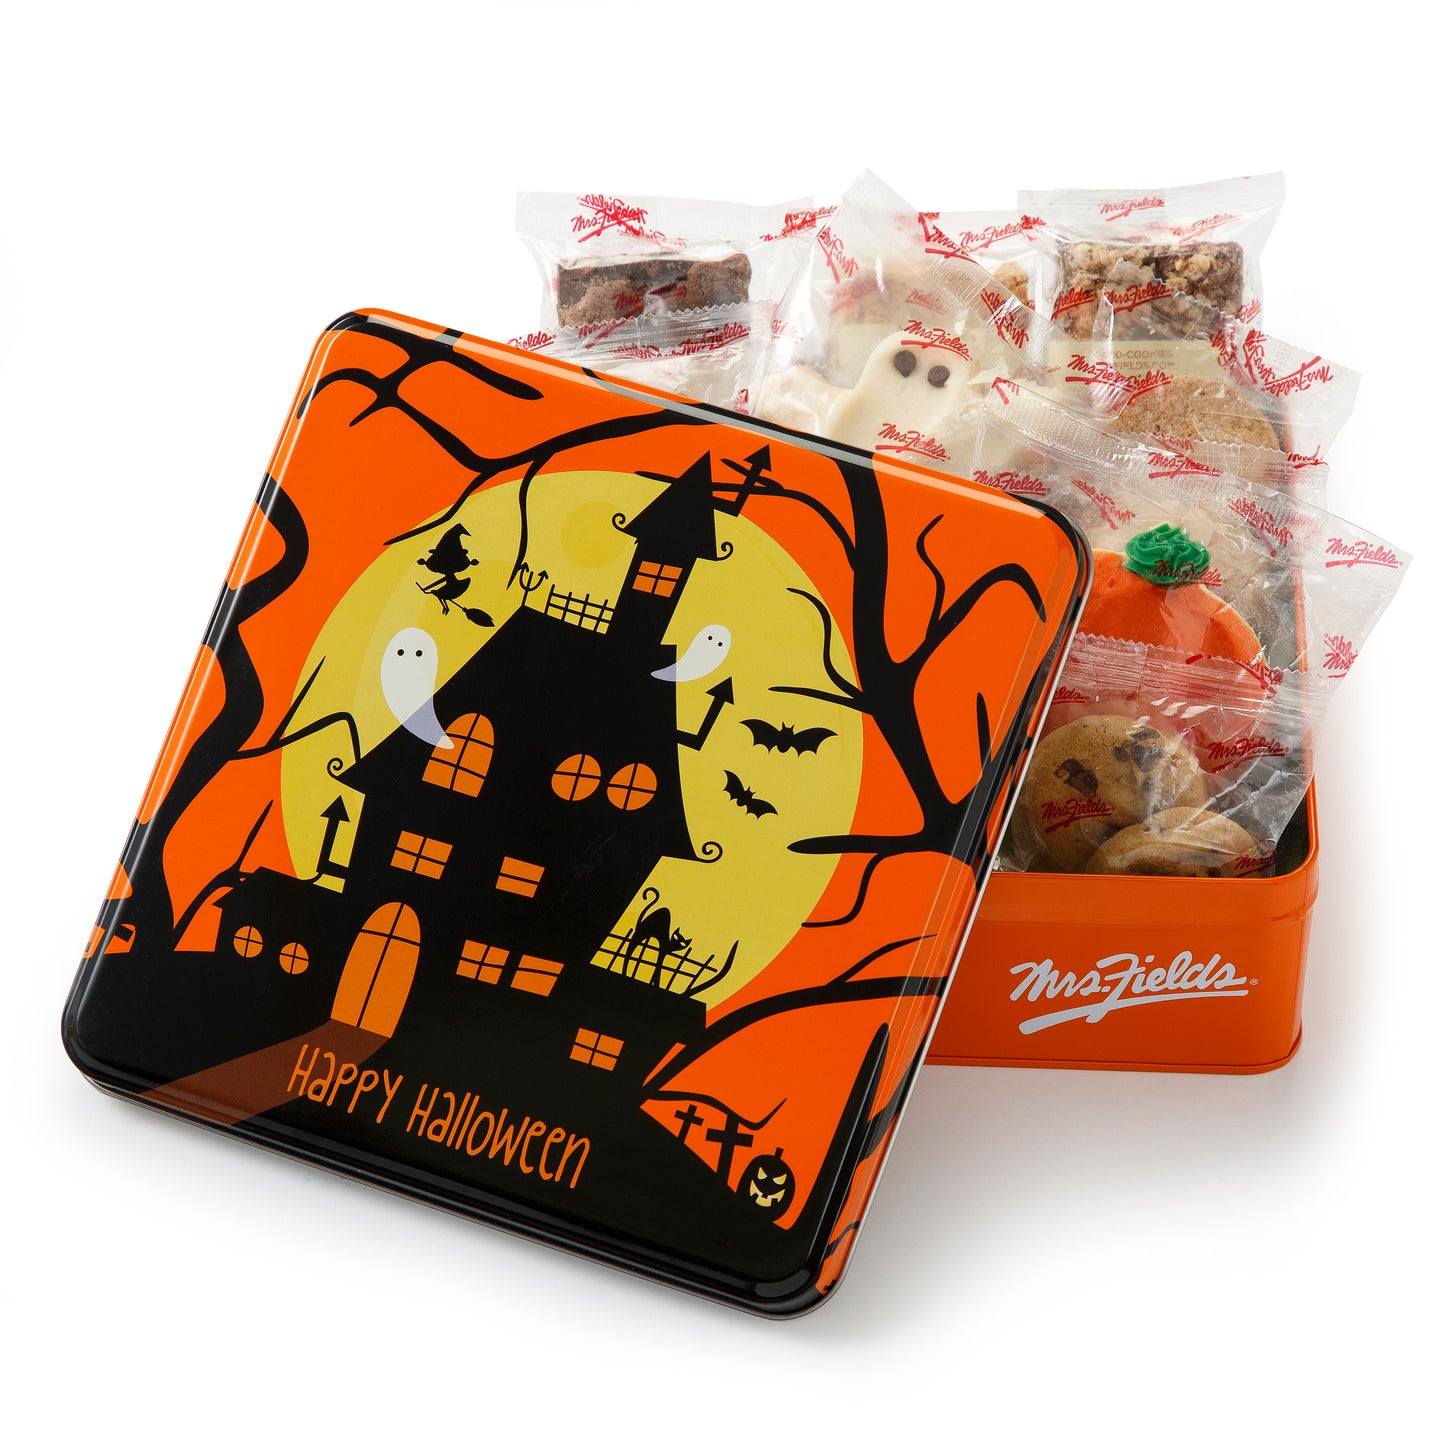 A Happy Halloween gift tin decorated with a spooky haunted house and filled with an assortment of packaged cookies